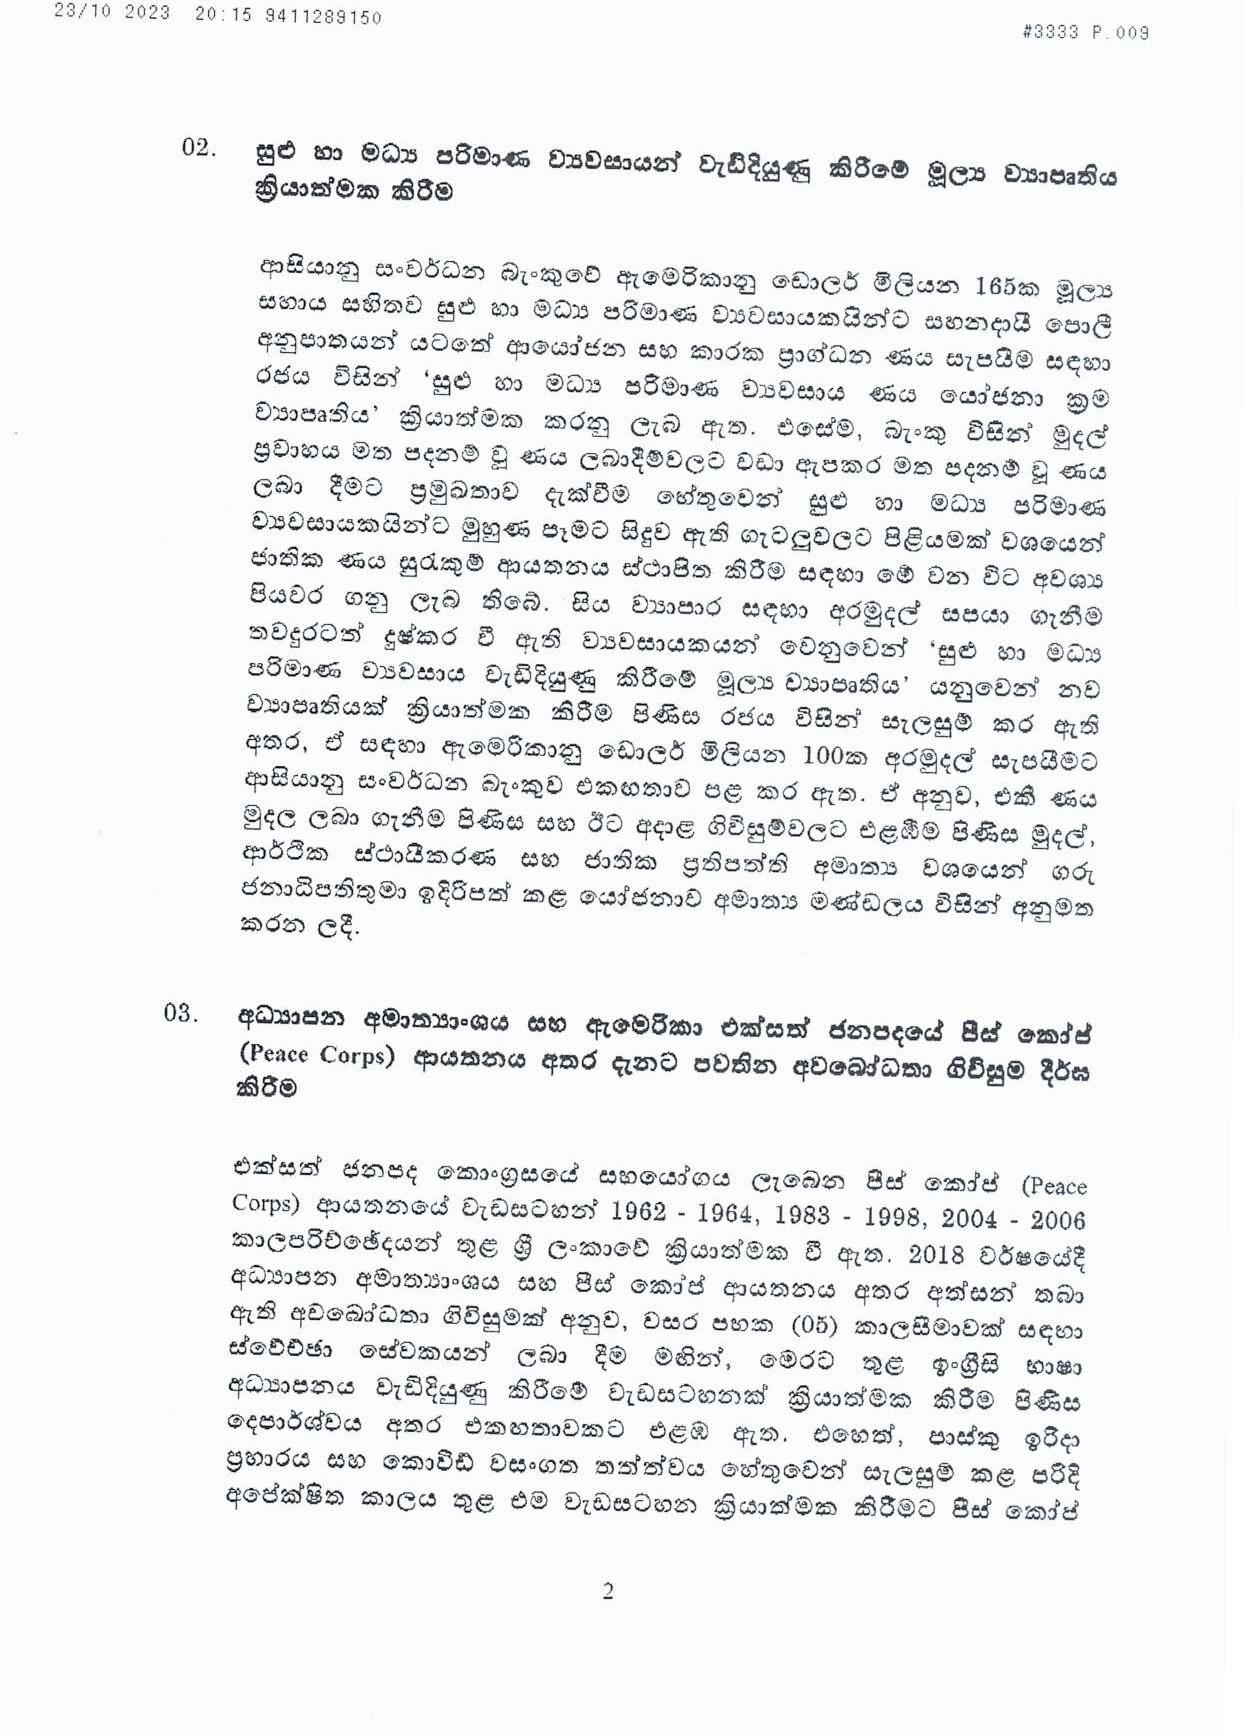 Cabinet Decision on 23.10.2023 page 002